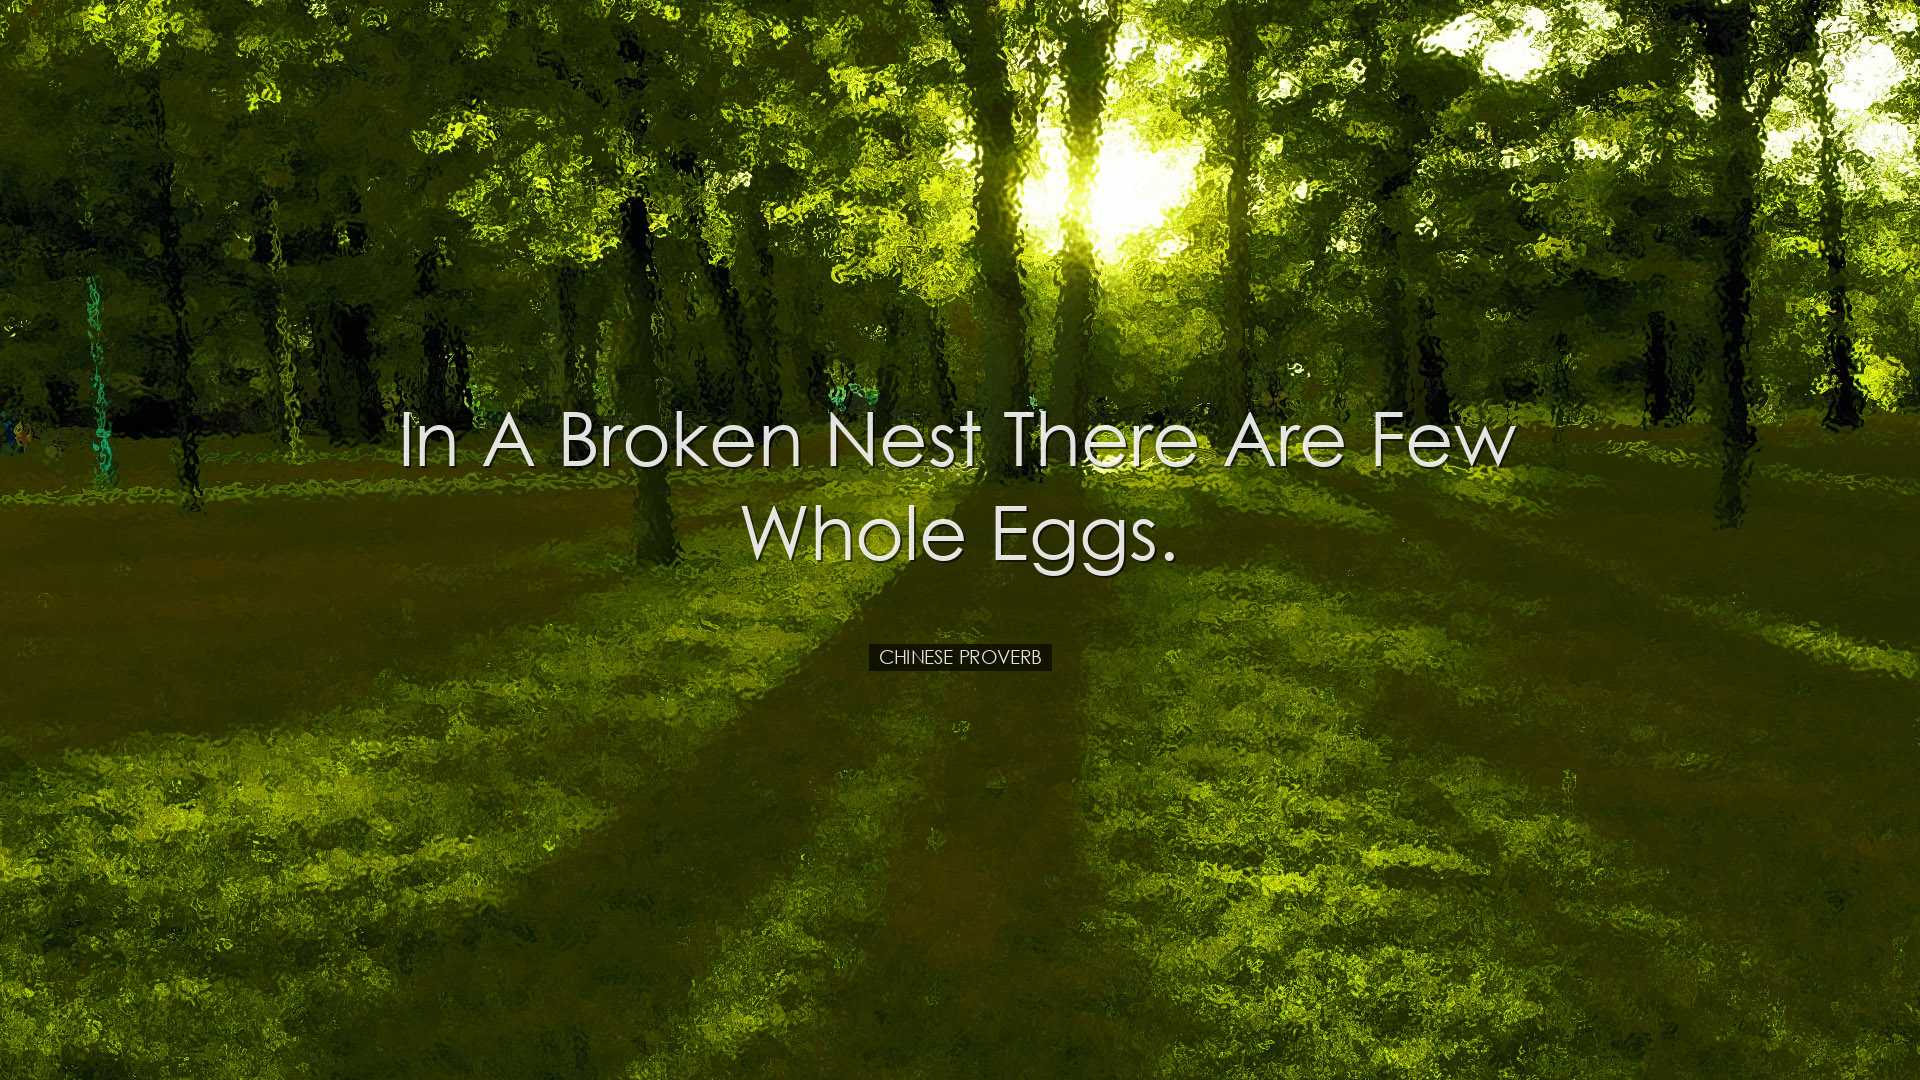 In a broken nest there are few whole eggs. - Chinese Proverb